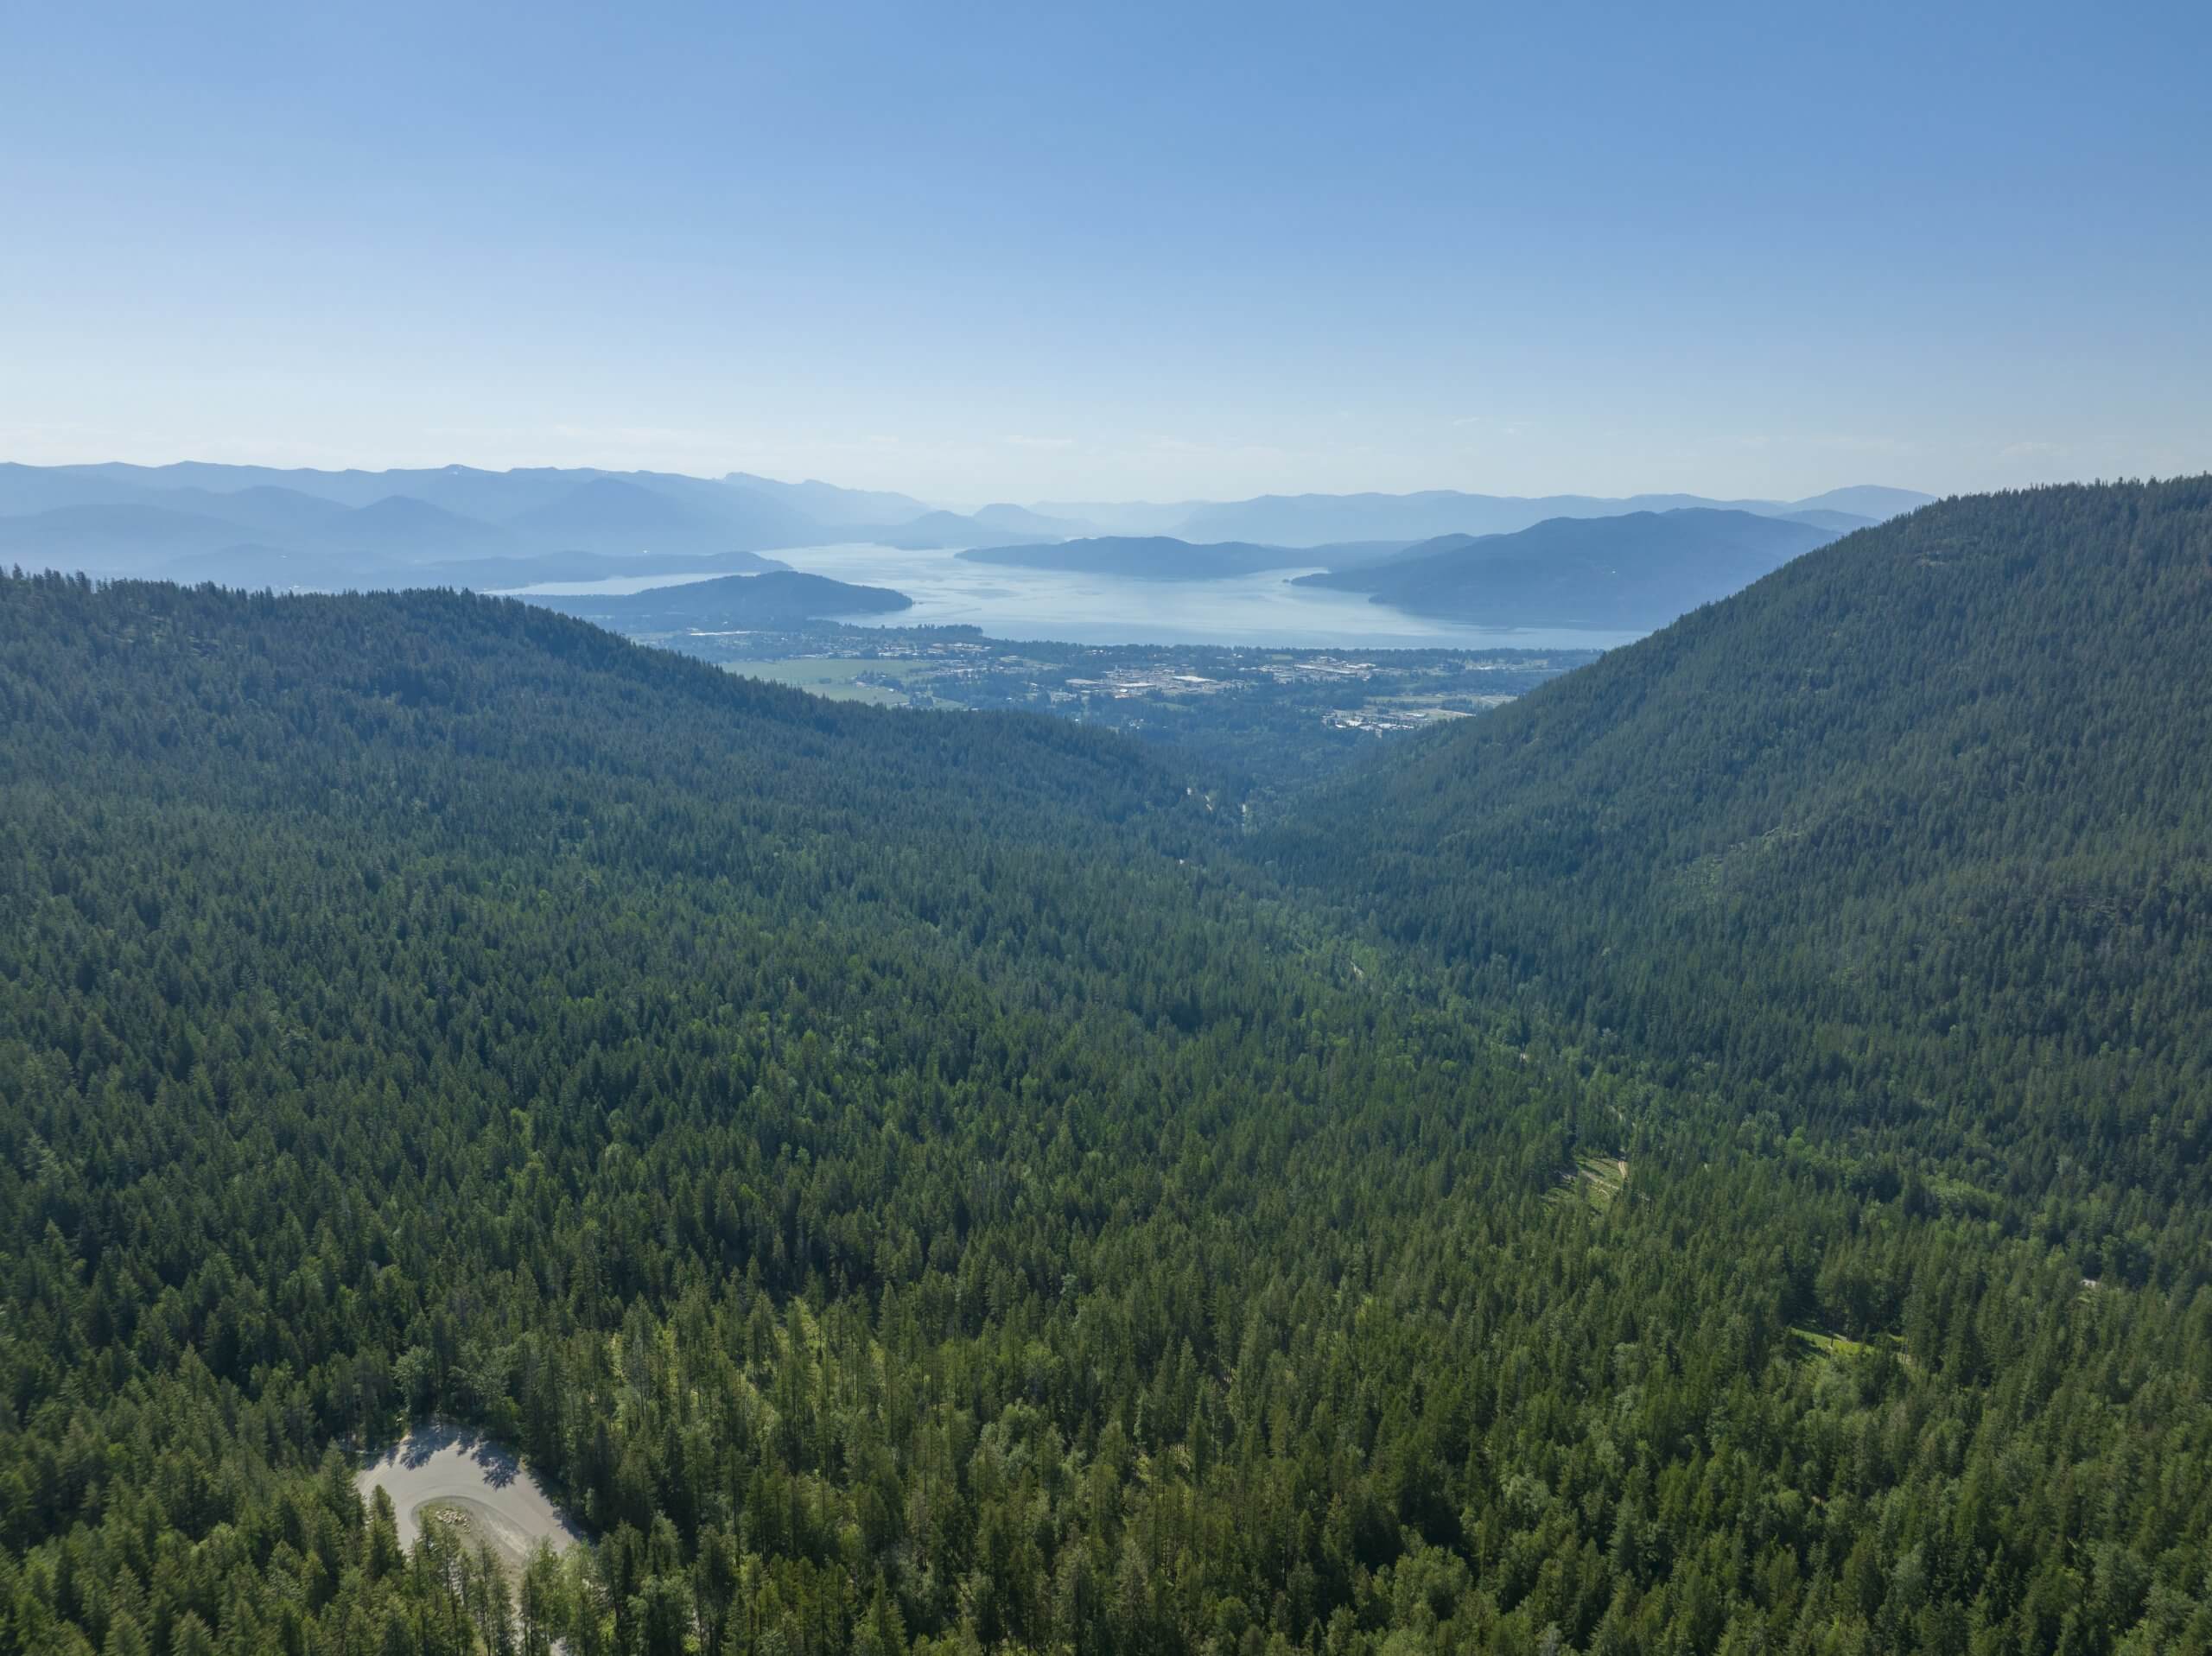 A scenic shot from Schweitzer Mountain overlooking the town of Sandpoint and Lake Pend Oreille.